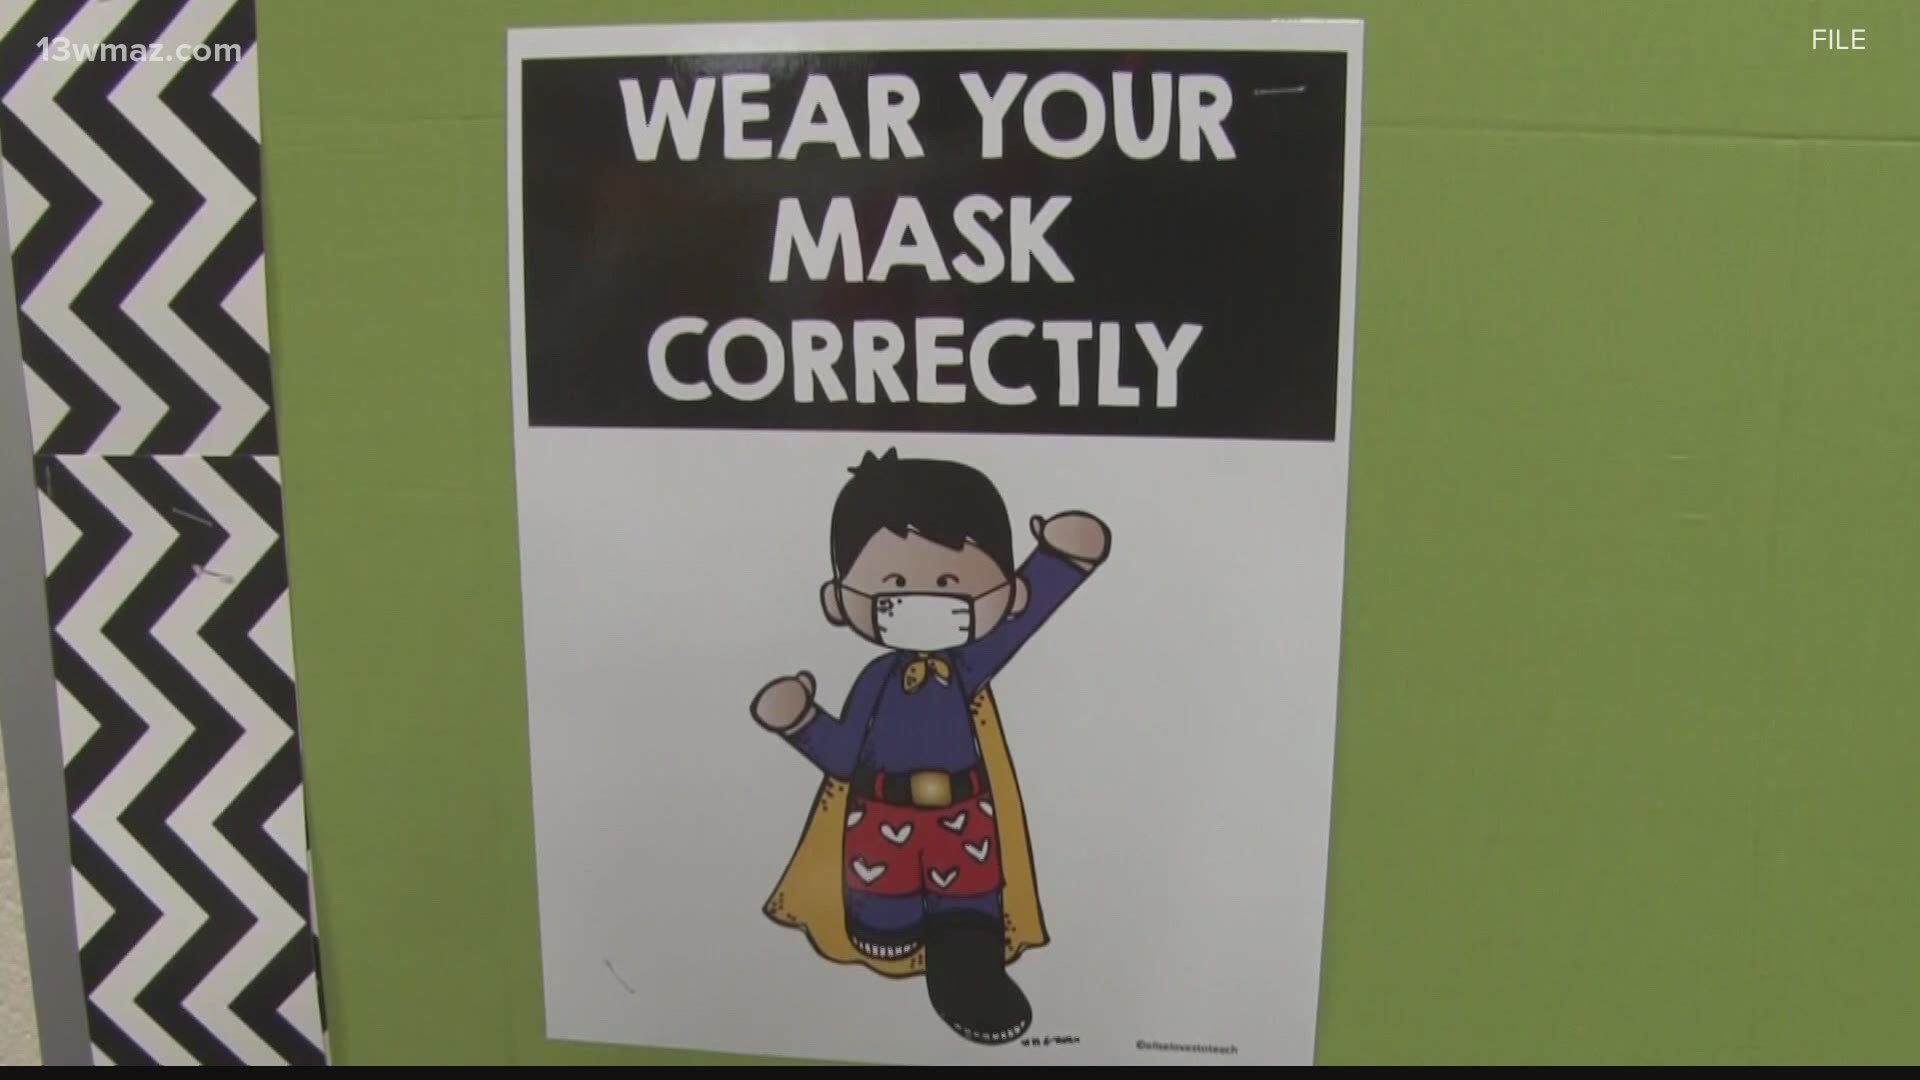 Board members voted 5 to 2 to make masks optional in all school buildings, on school grounds, and while riding the bus.